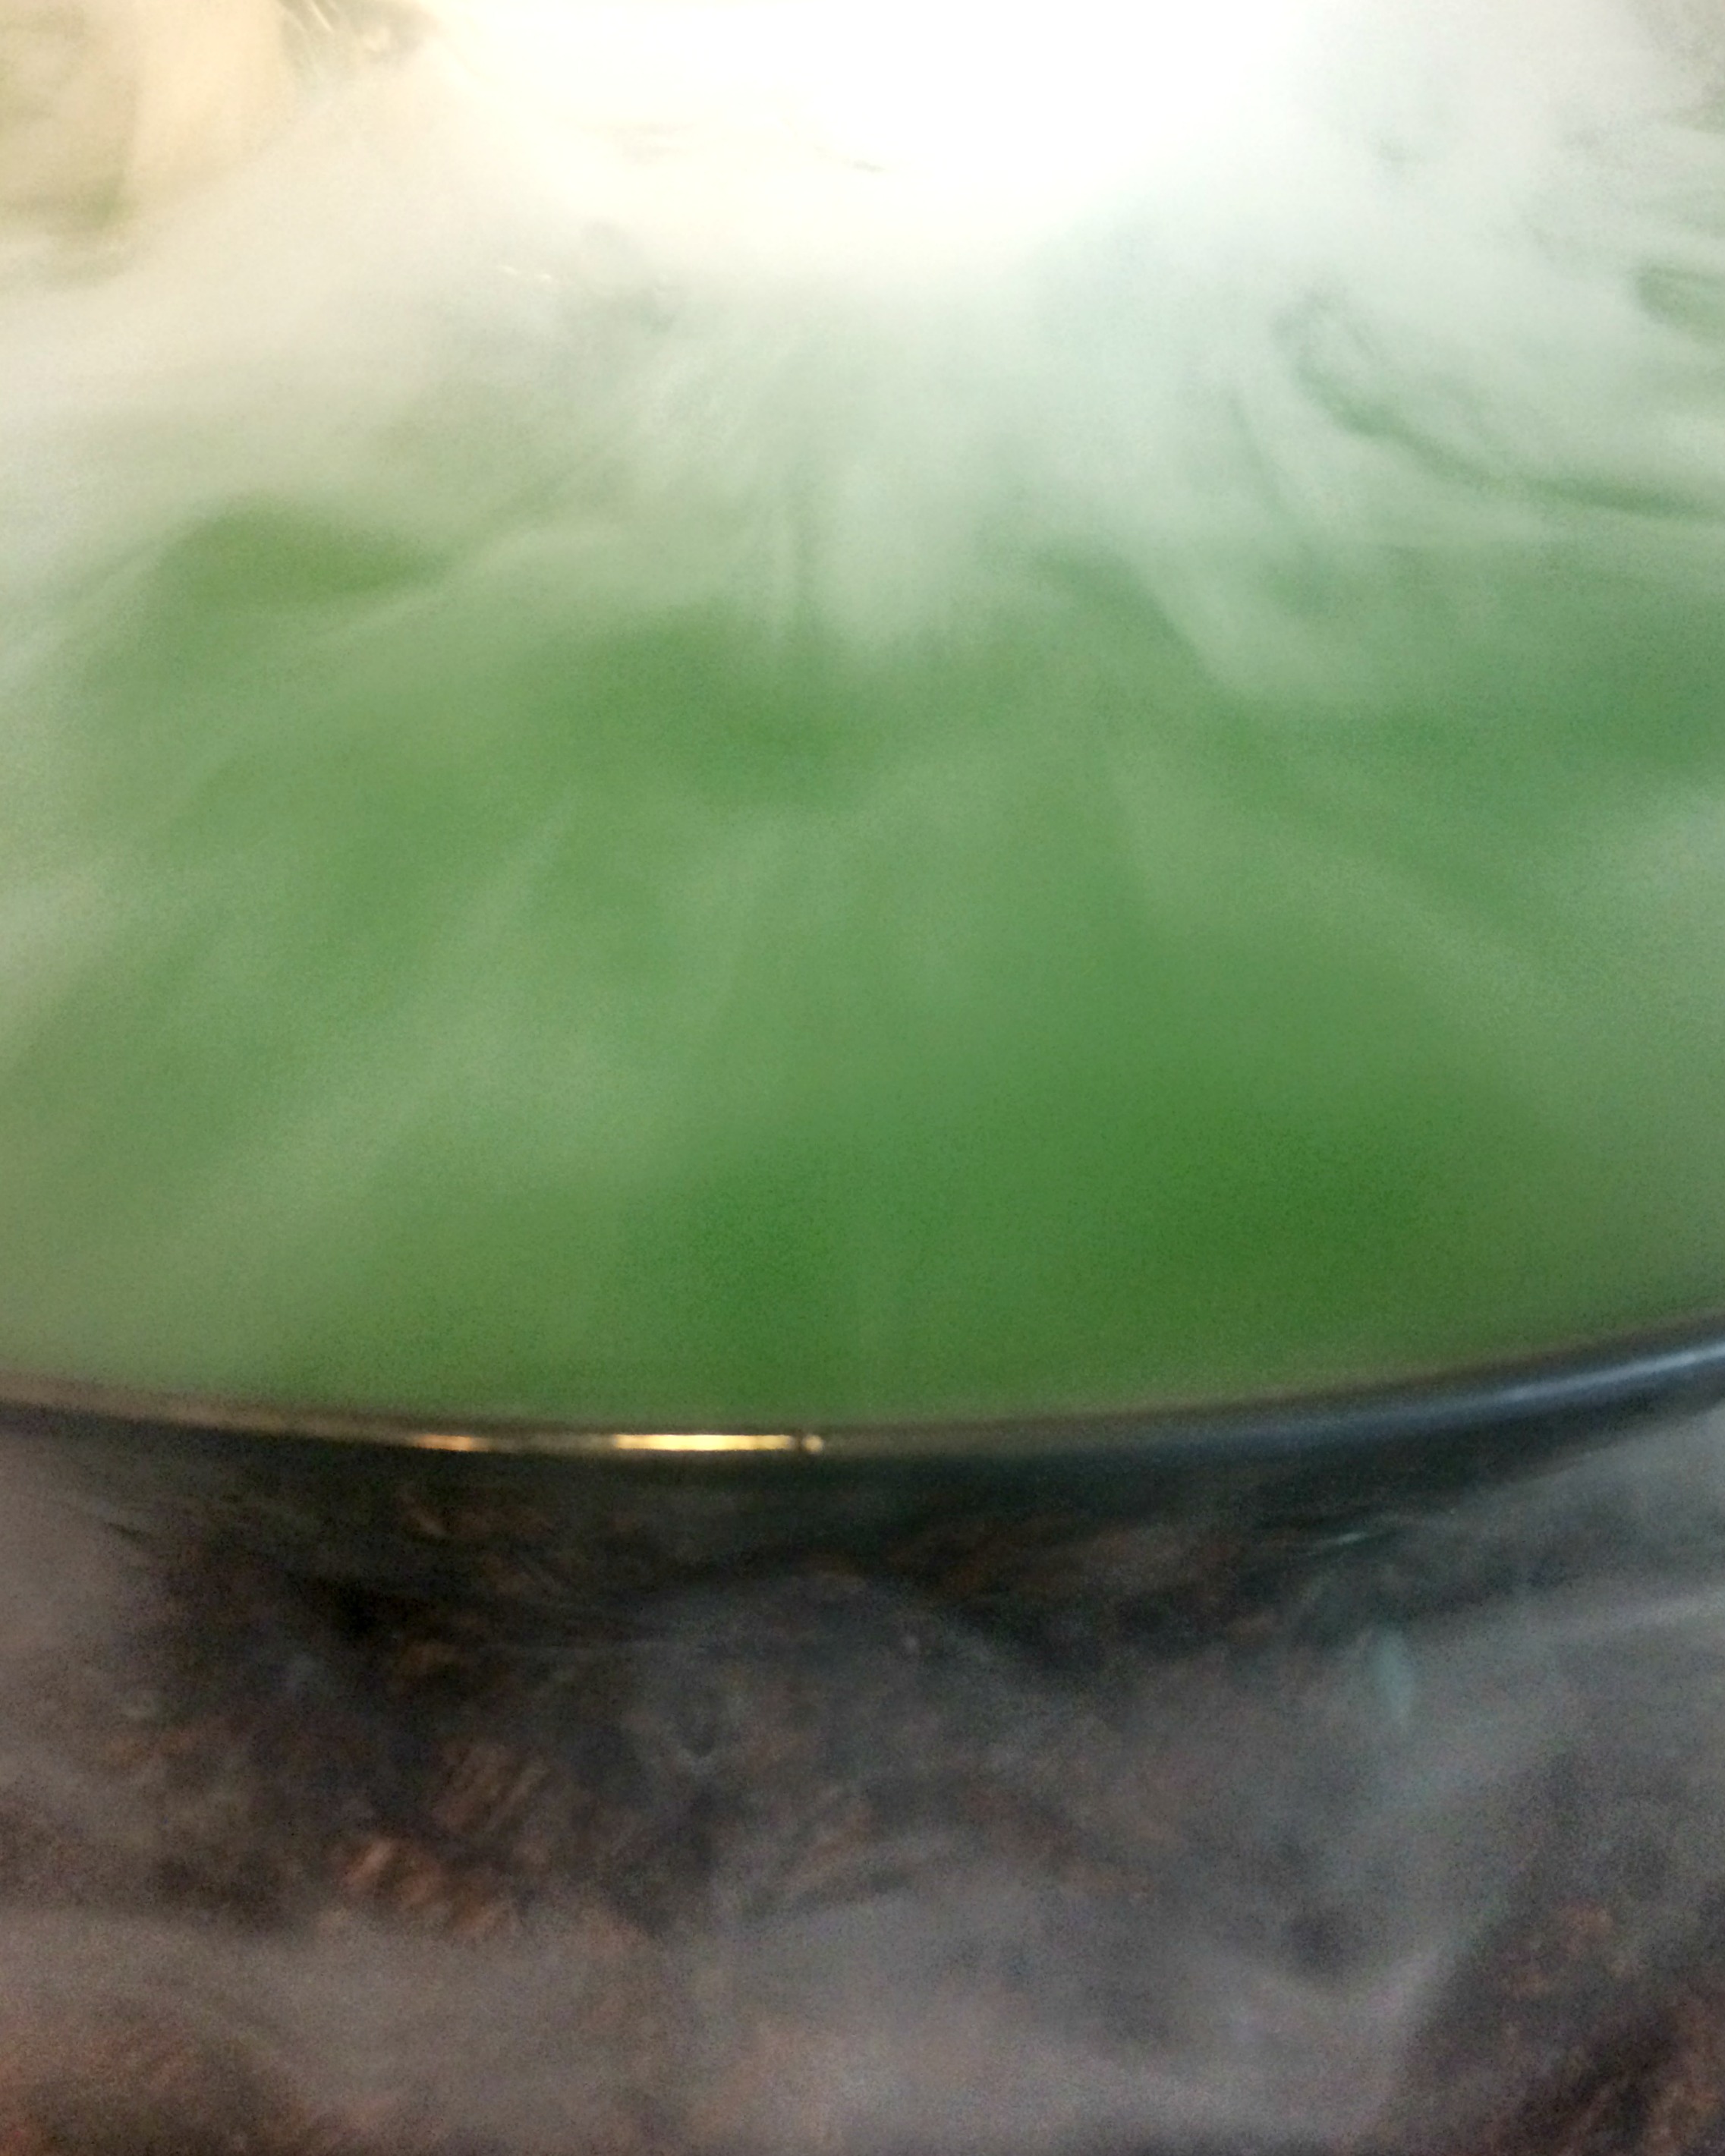 Evil Queen's punch dry ice